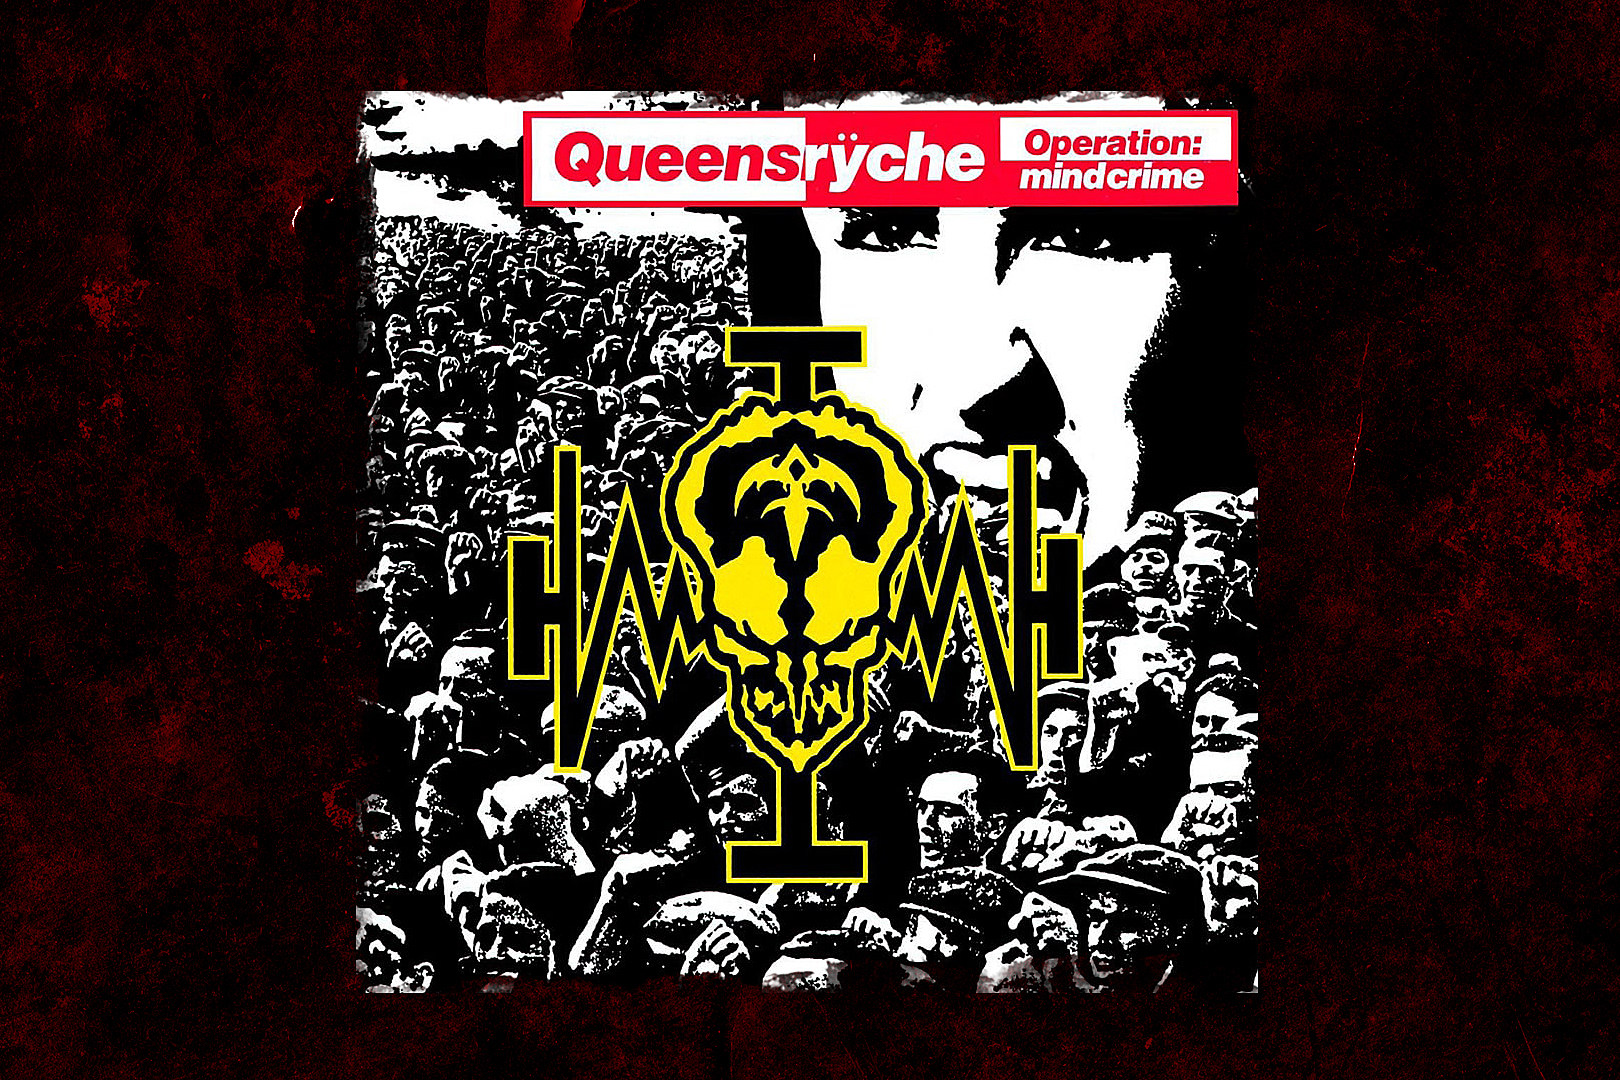 35 Years Ago: Queensryche Release ‘Operation: Mindcrime’